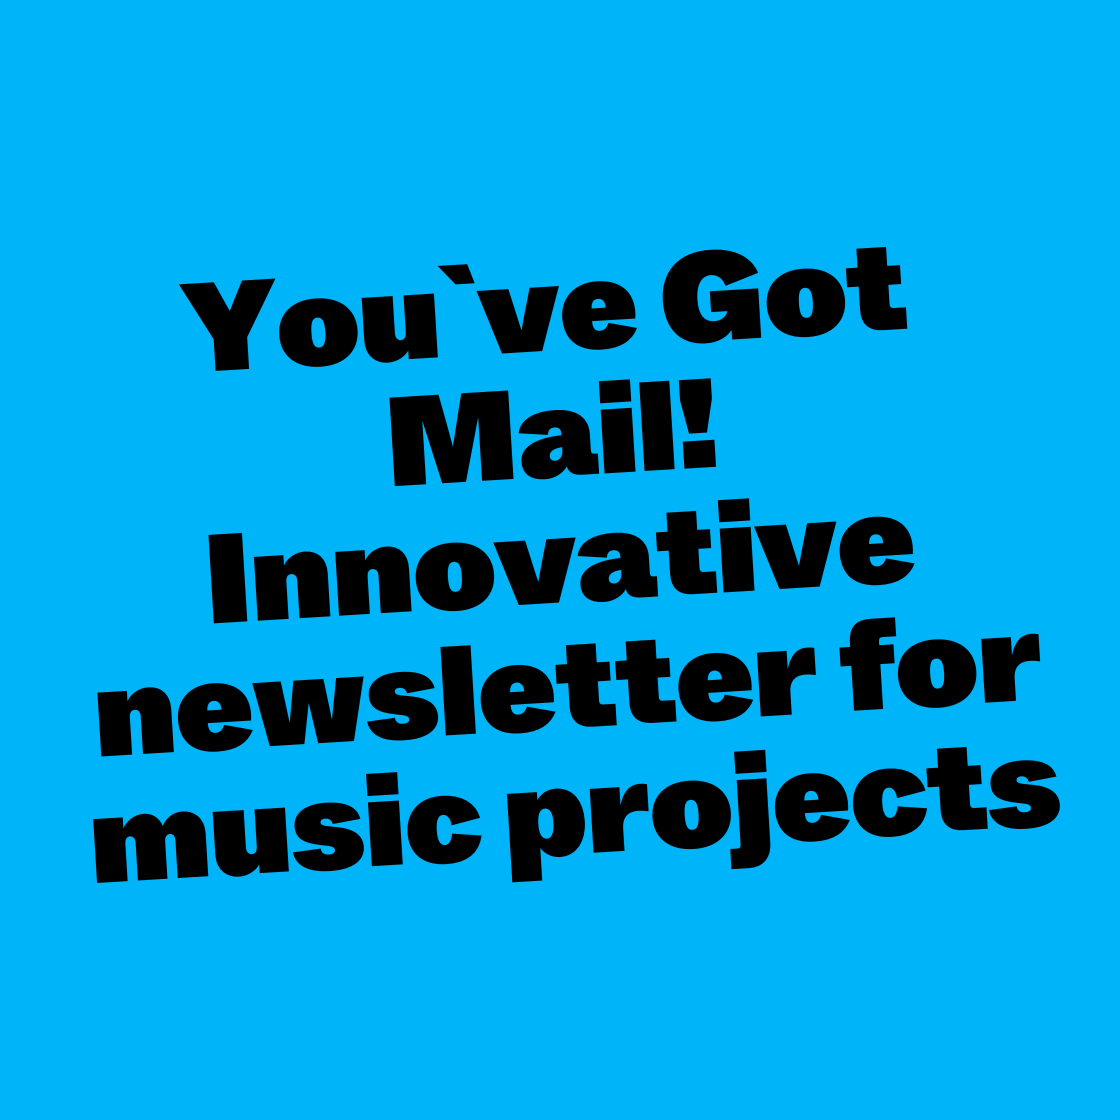 You've Got Mail! Innovative Newsletter for music projects